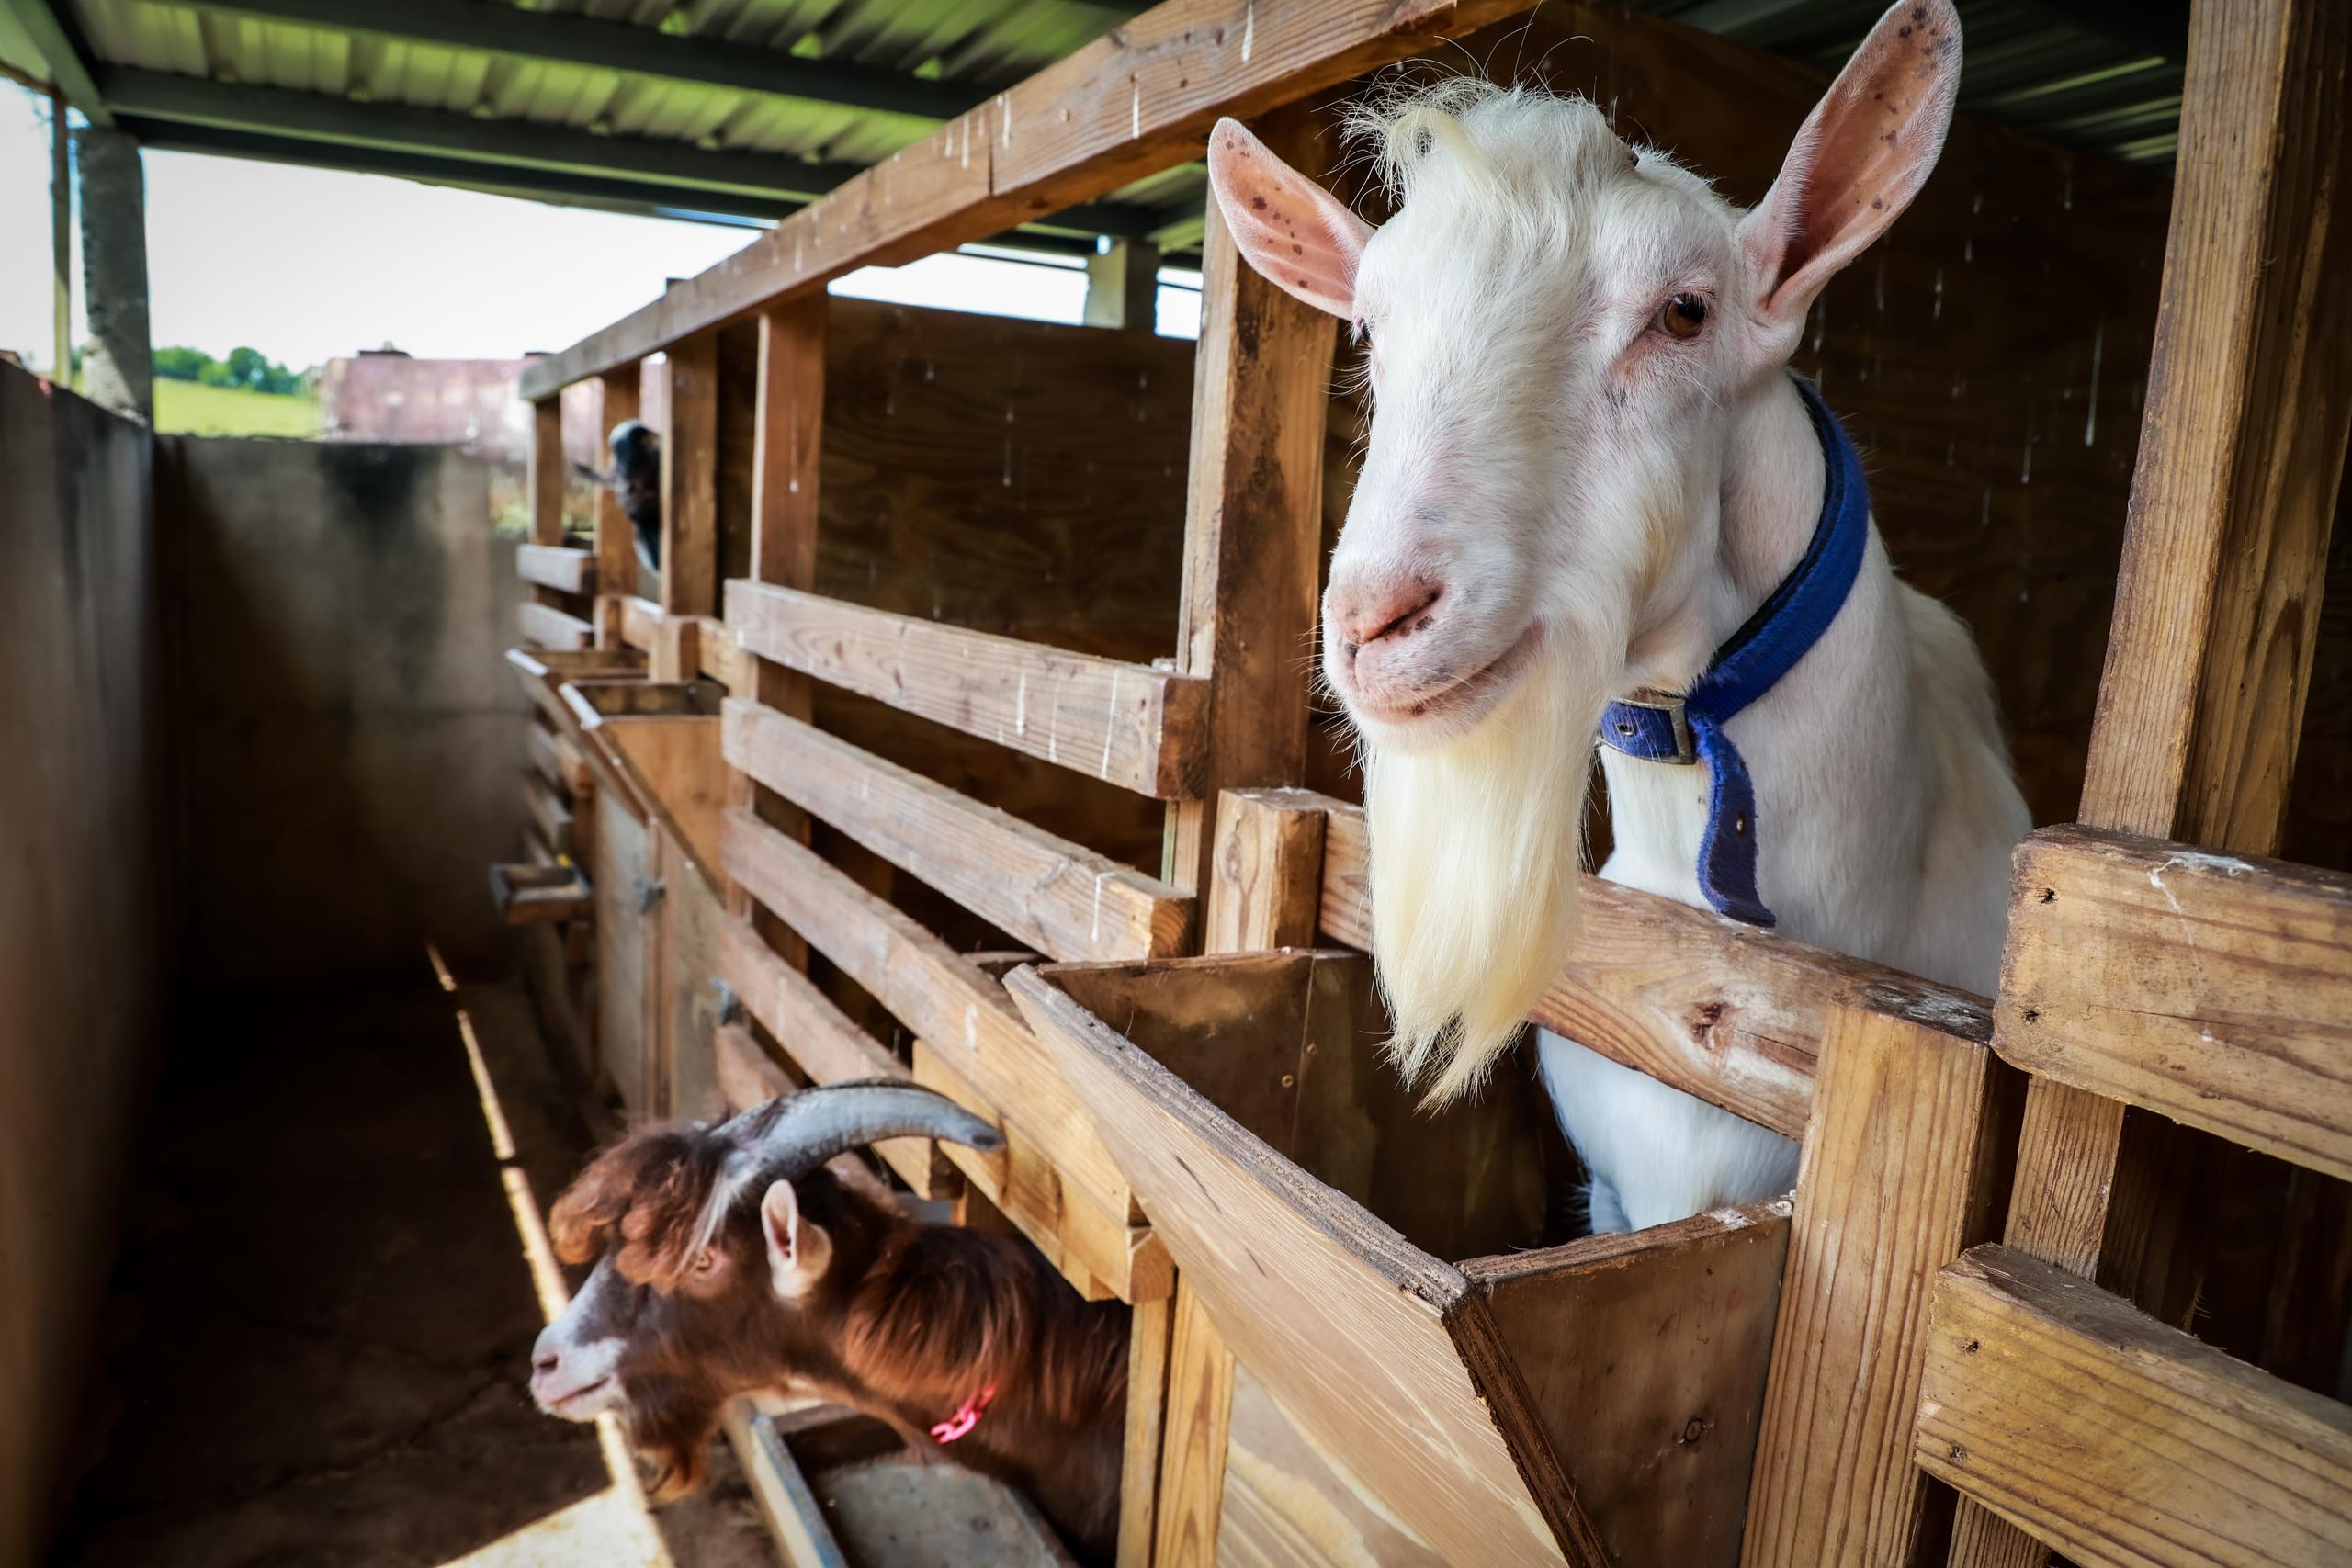 At Hacienda Dos Aromas they also offer tours and tastings of gelato made with goat's milk.